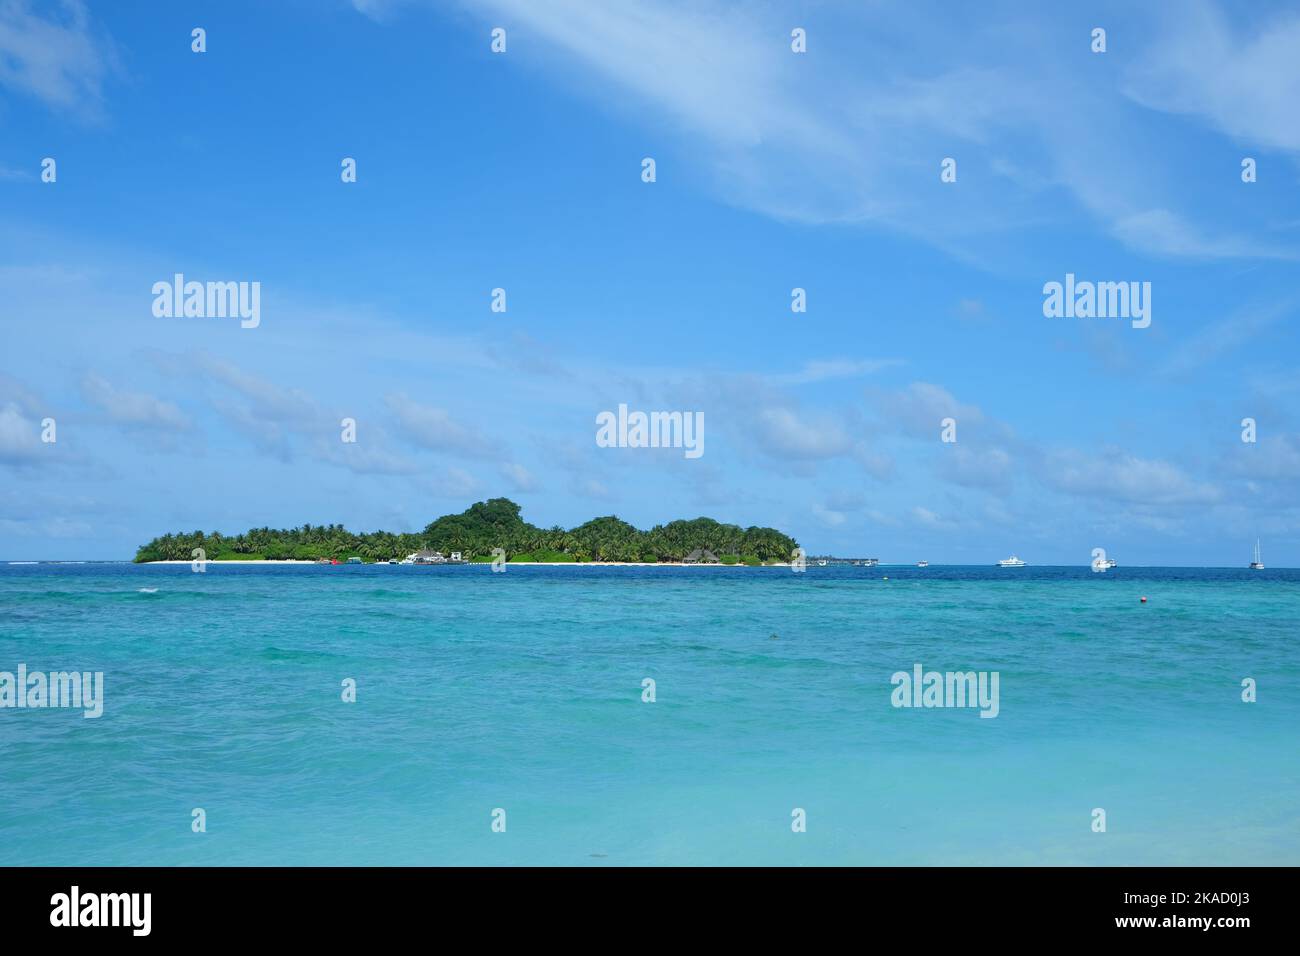 Rasdhoo is famous for its habitats of black and white tip reef sharks. It is a small island in Northern Ari Atoll with beautiful beaches. Stock Photo